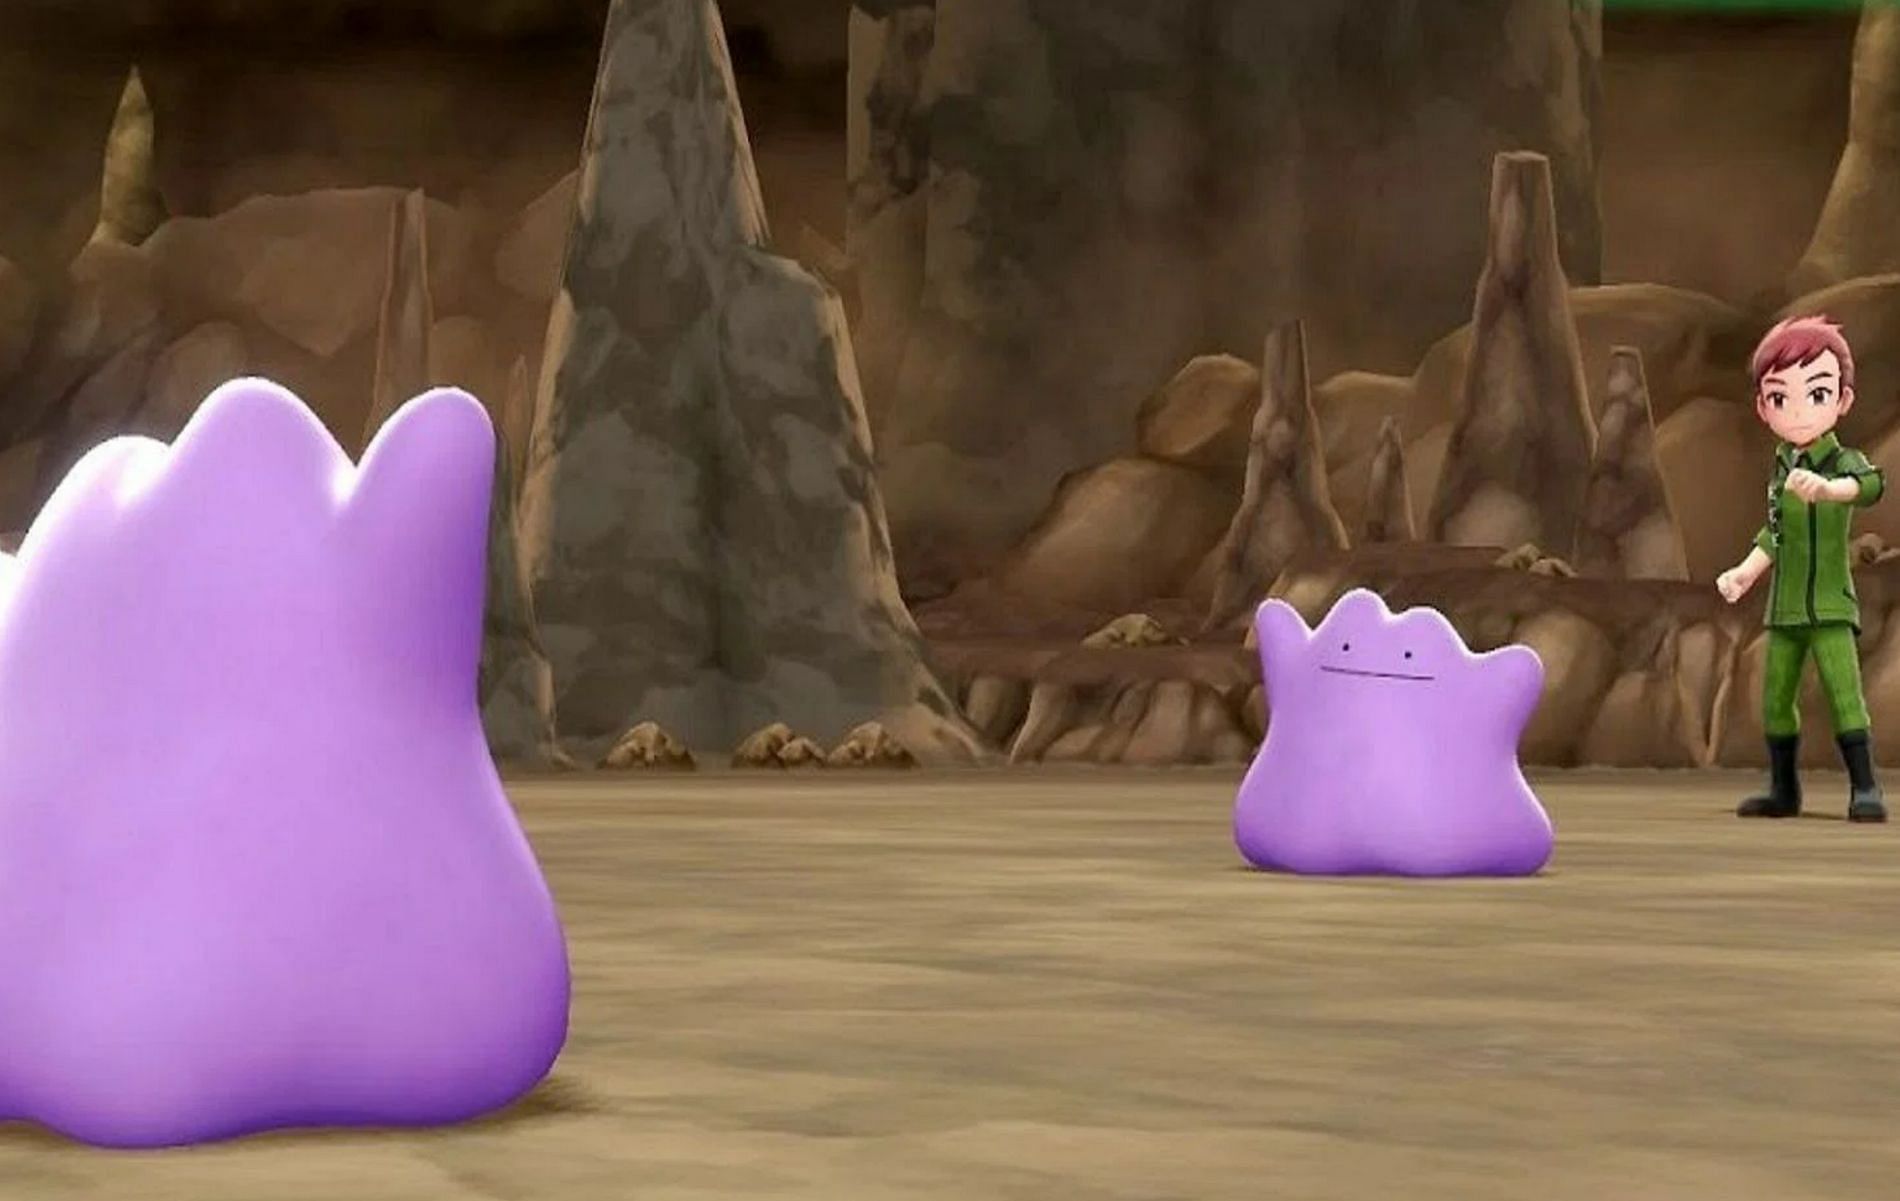 Ditto November 2023, how to find, catch and shiny Ditto odds in Pokémon GO